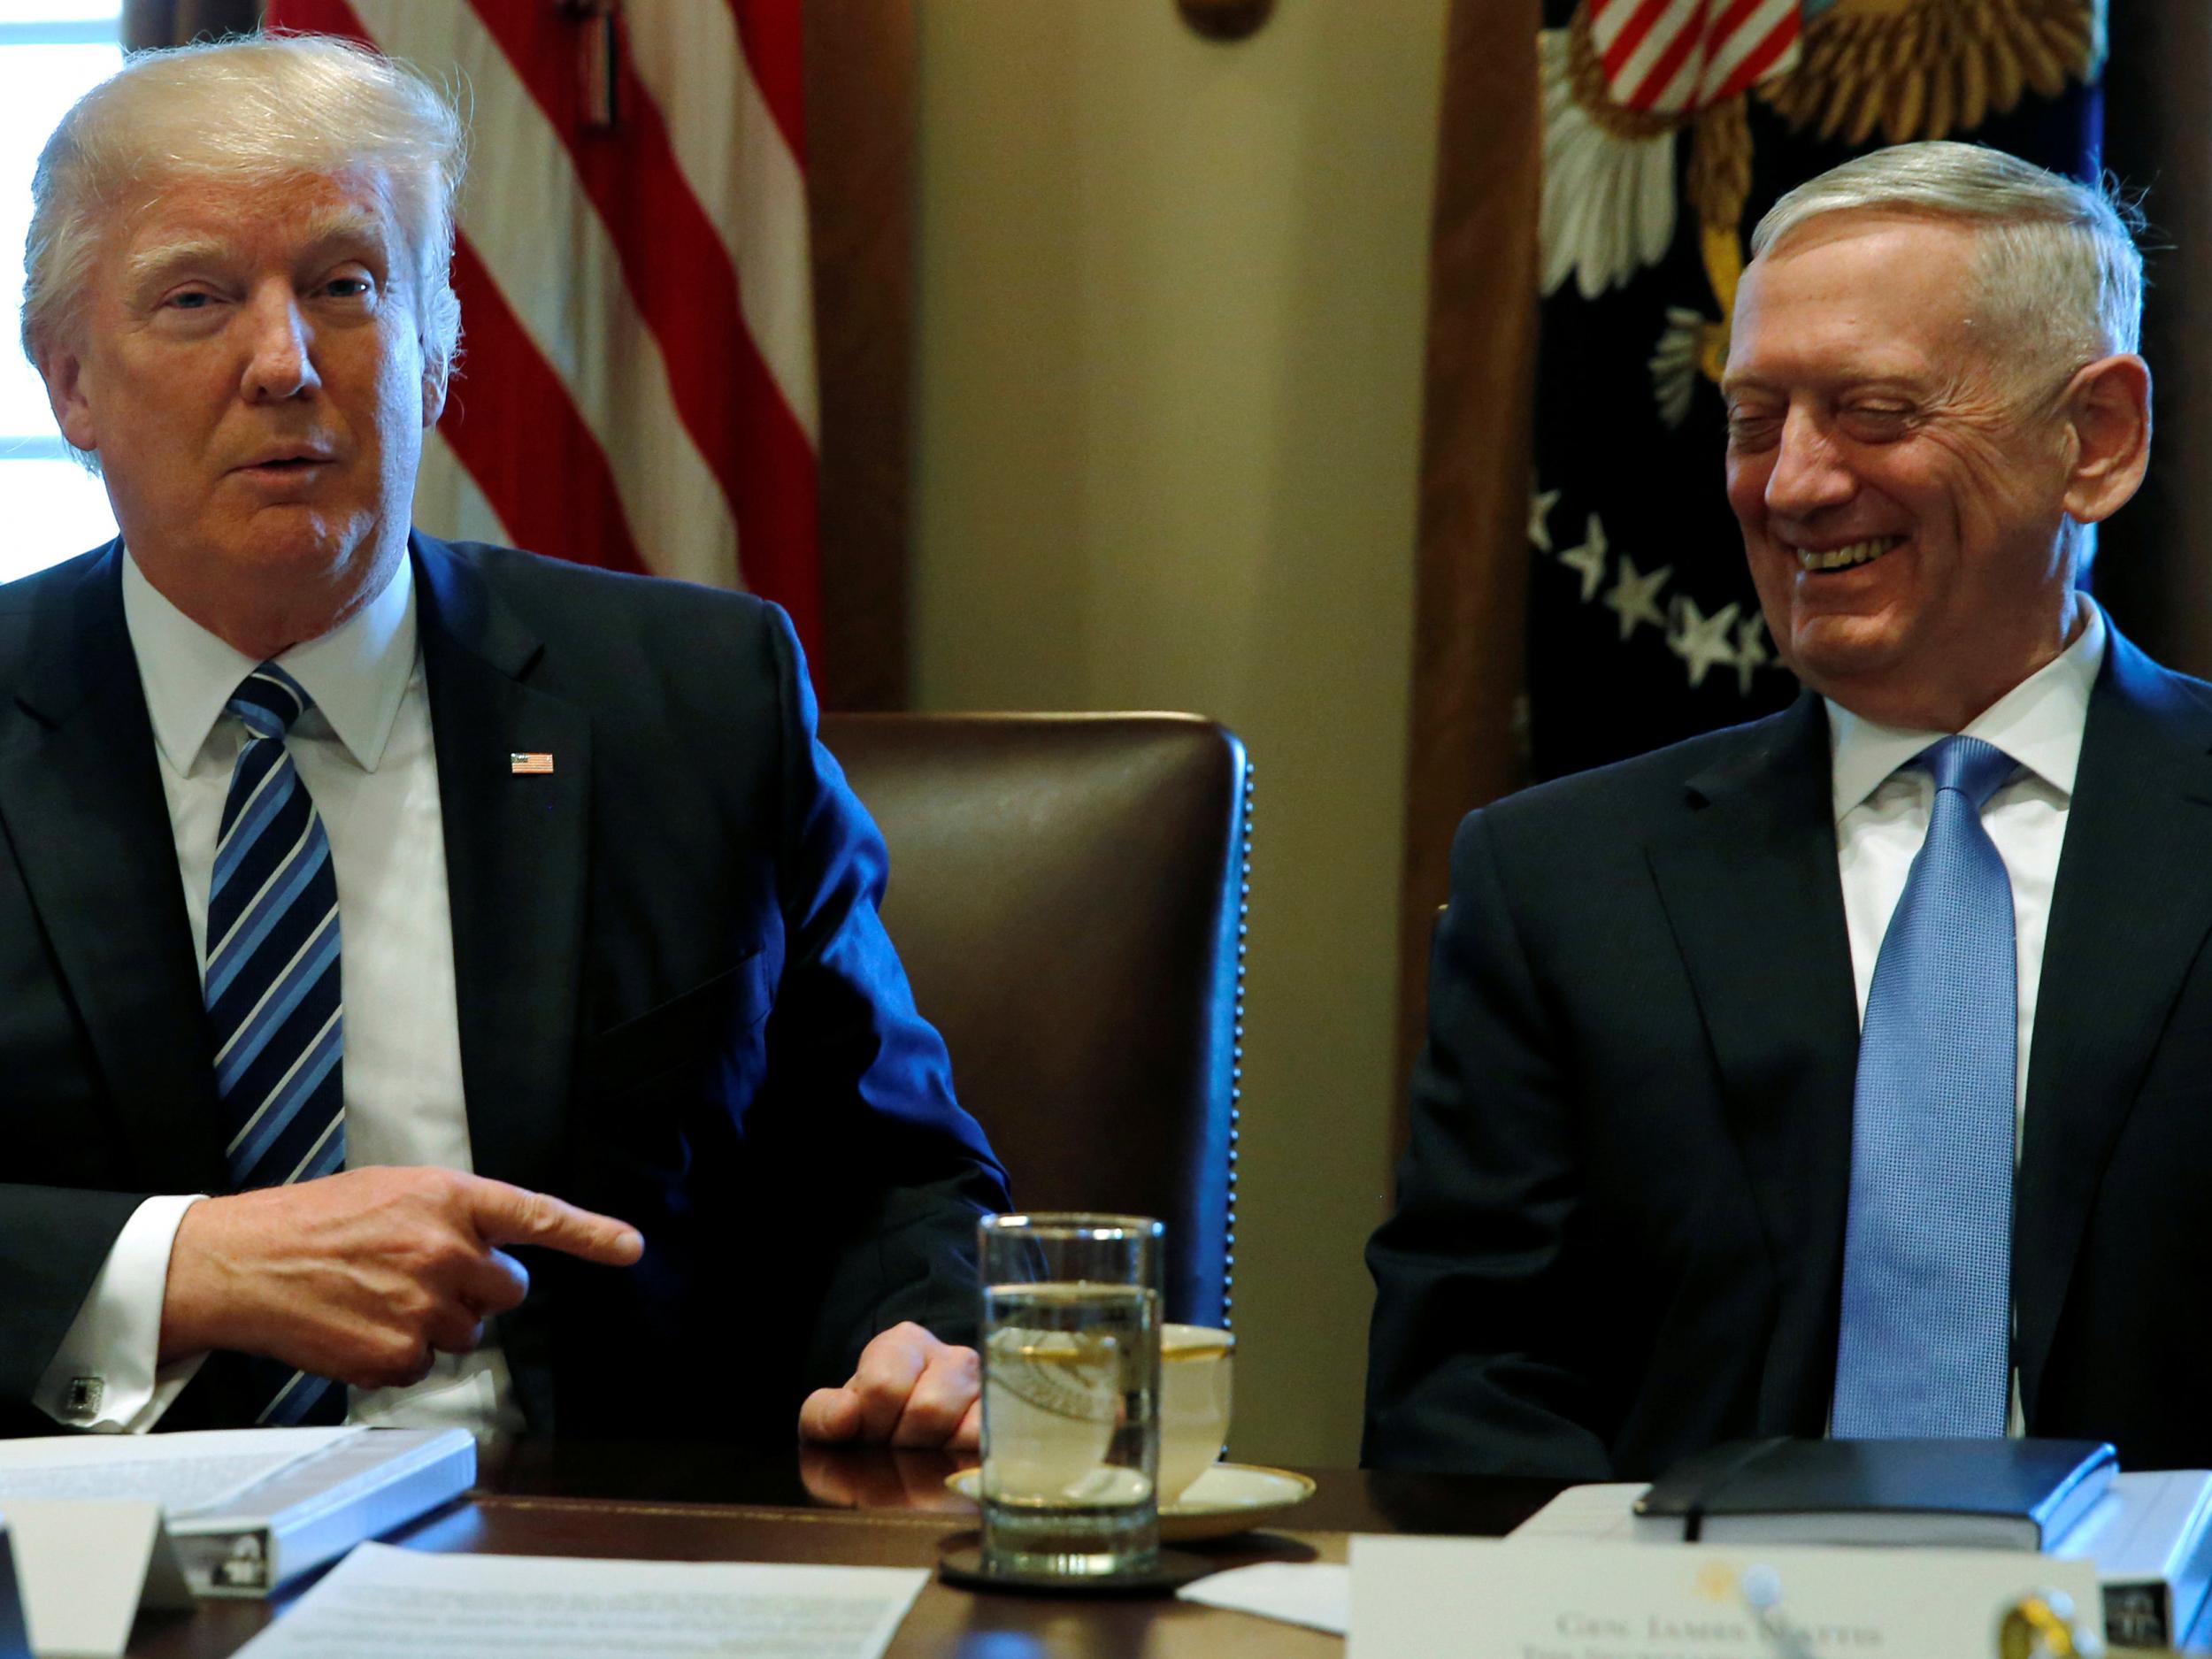 President Donald Trump chairs a Cabinet meeting at the White House in Washington, flanked by General James Mattis